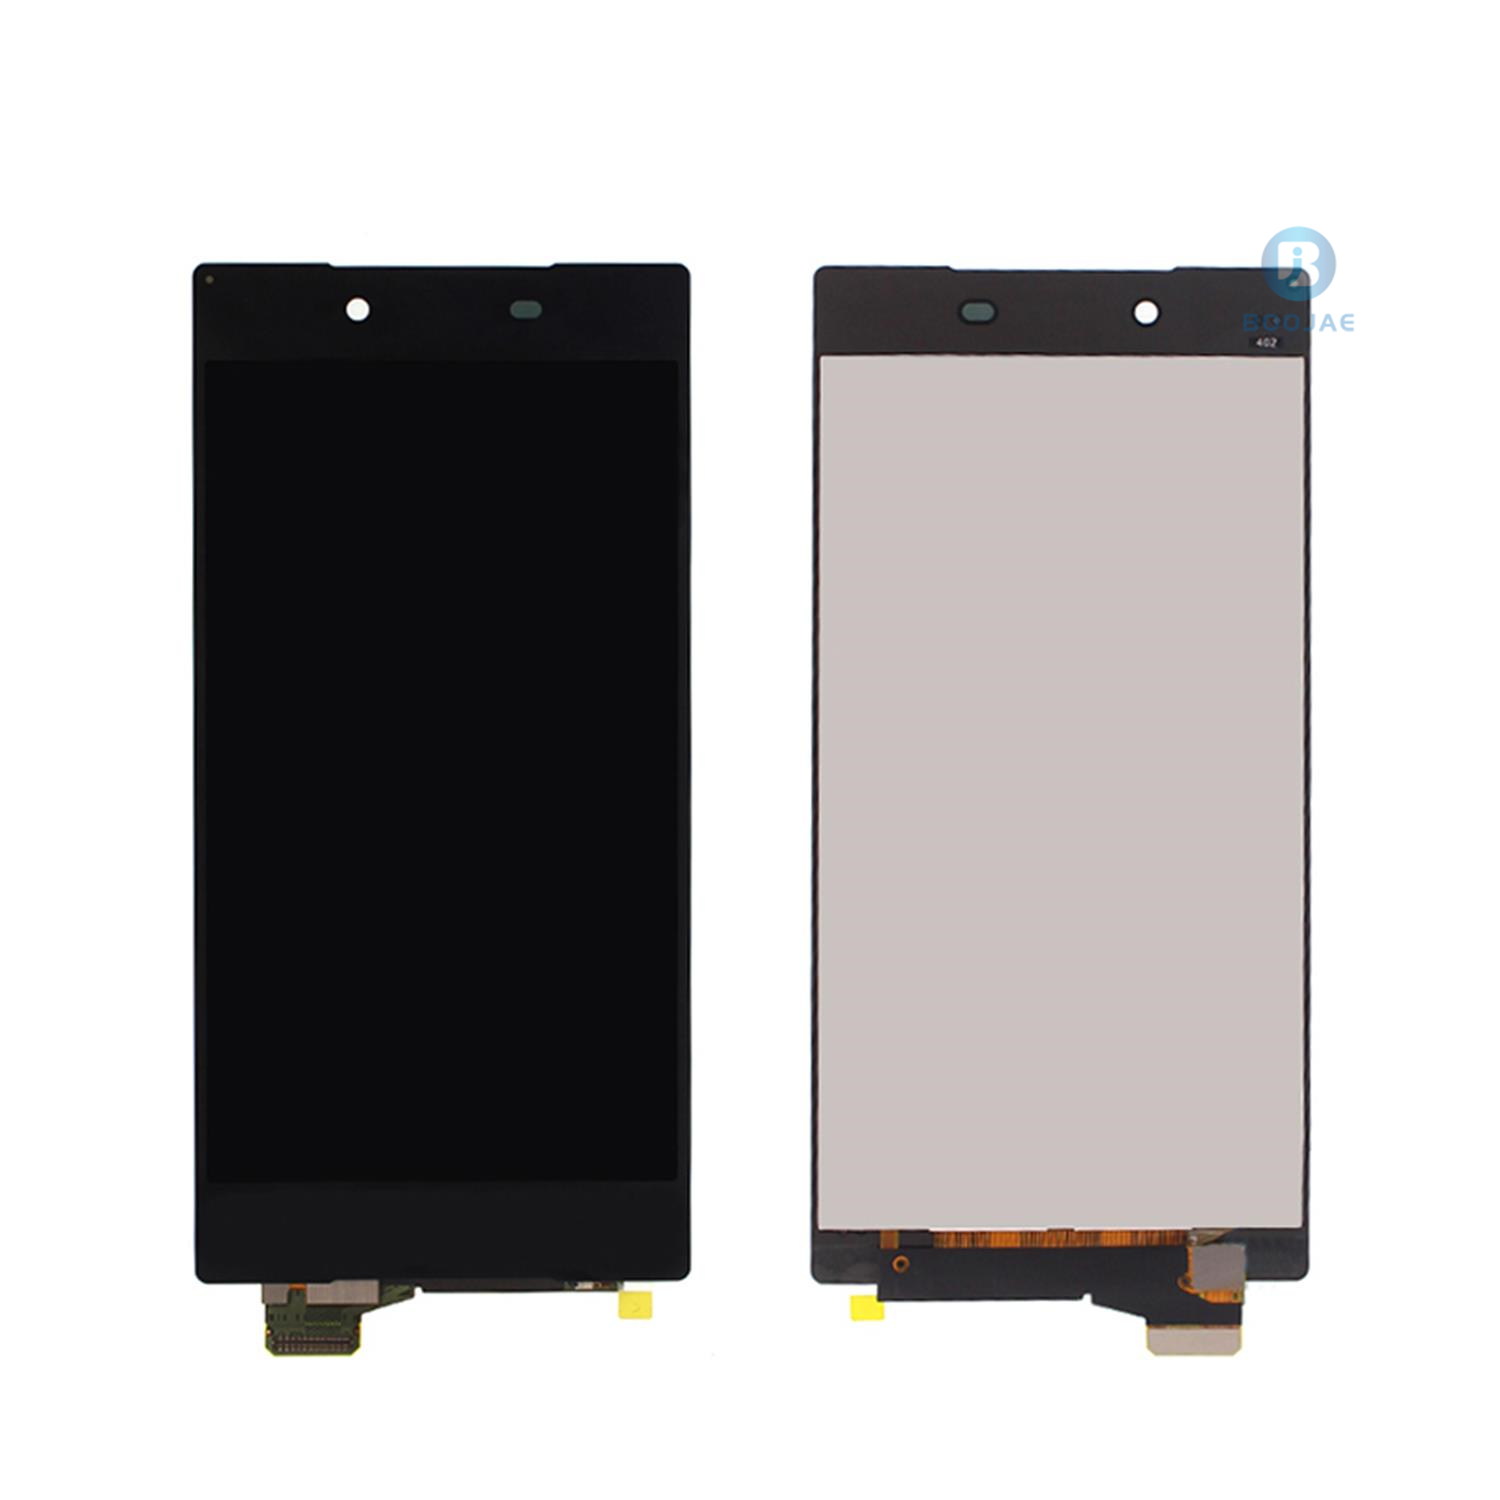 For Sony Xperia Z5 Premium LCD Screen Display and Touch Panel Digitizer Assembly Replacement